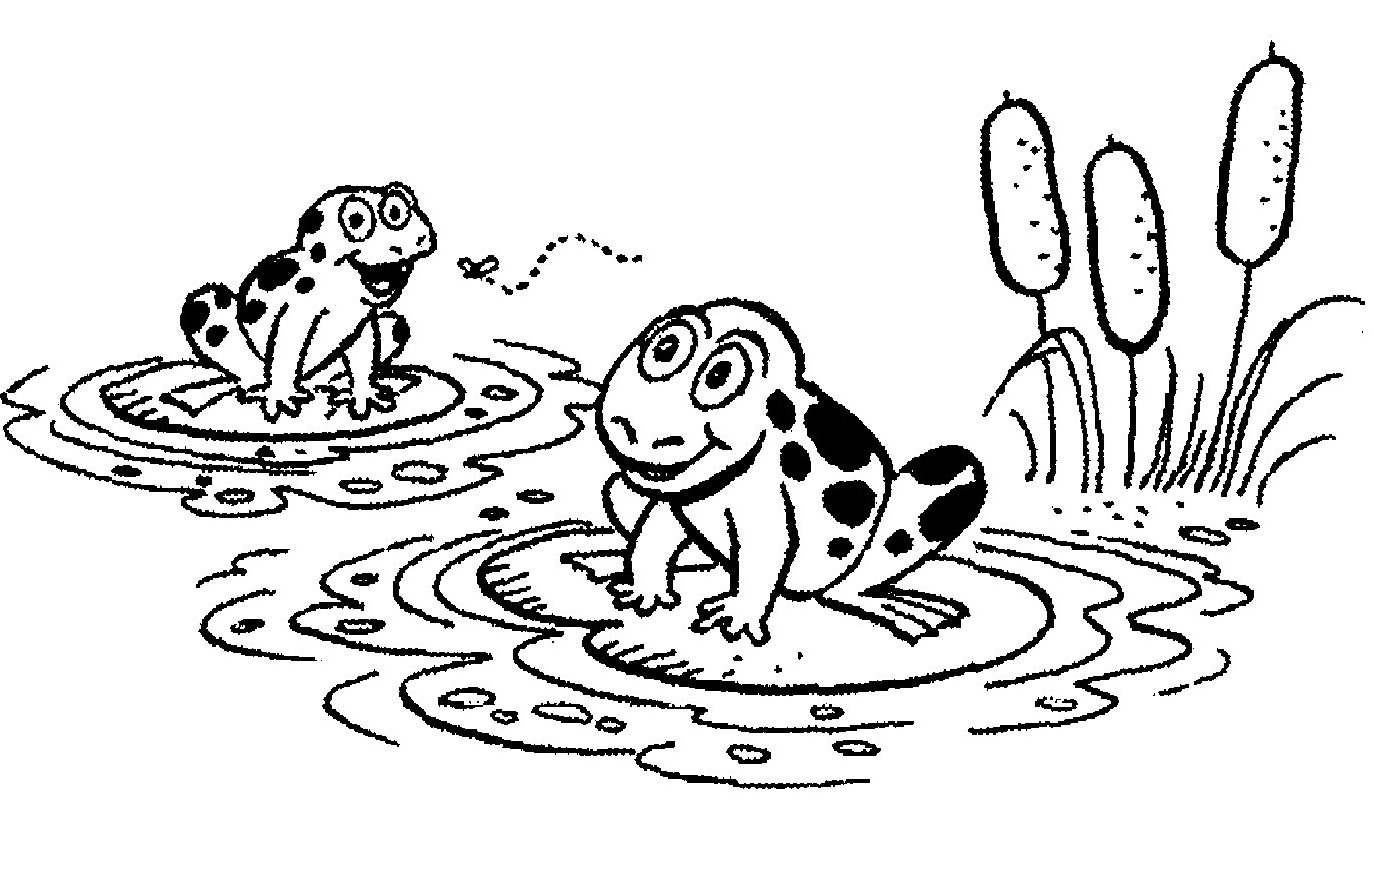 Lake Clipart Black And White   Clipart Panda   Free Clipart Images